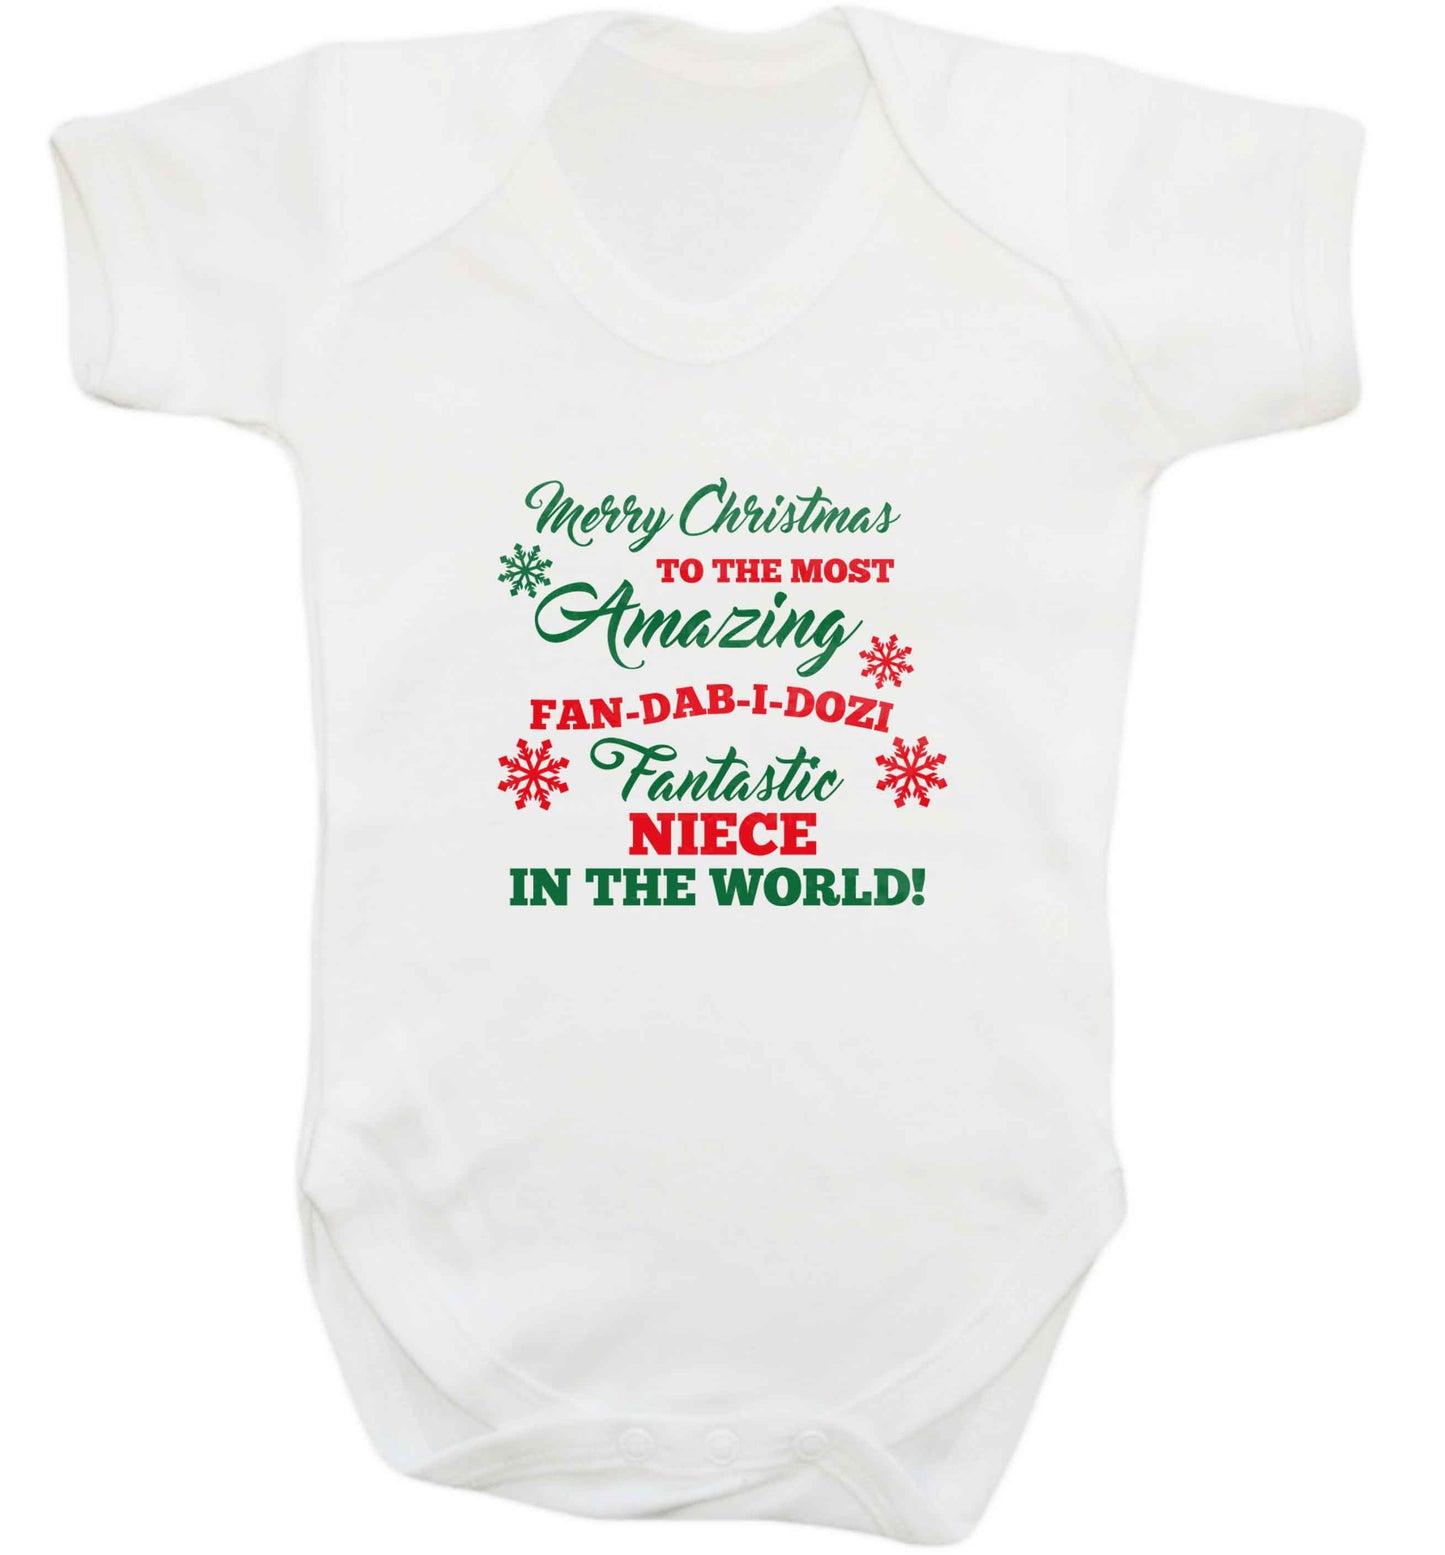 Merry Christmas to the most amazing fan-dab-i-dozi fantasic Niece in the world baby vest white 18-24 months